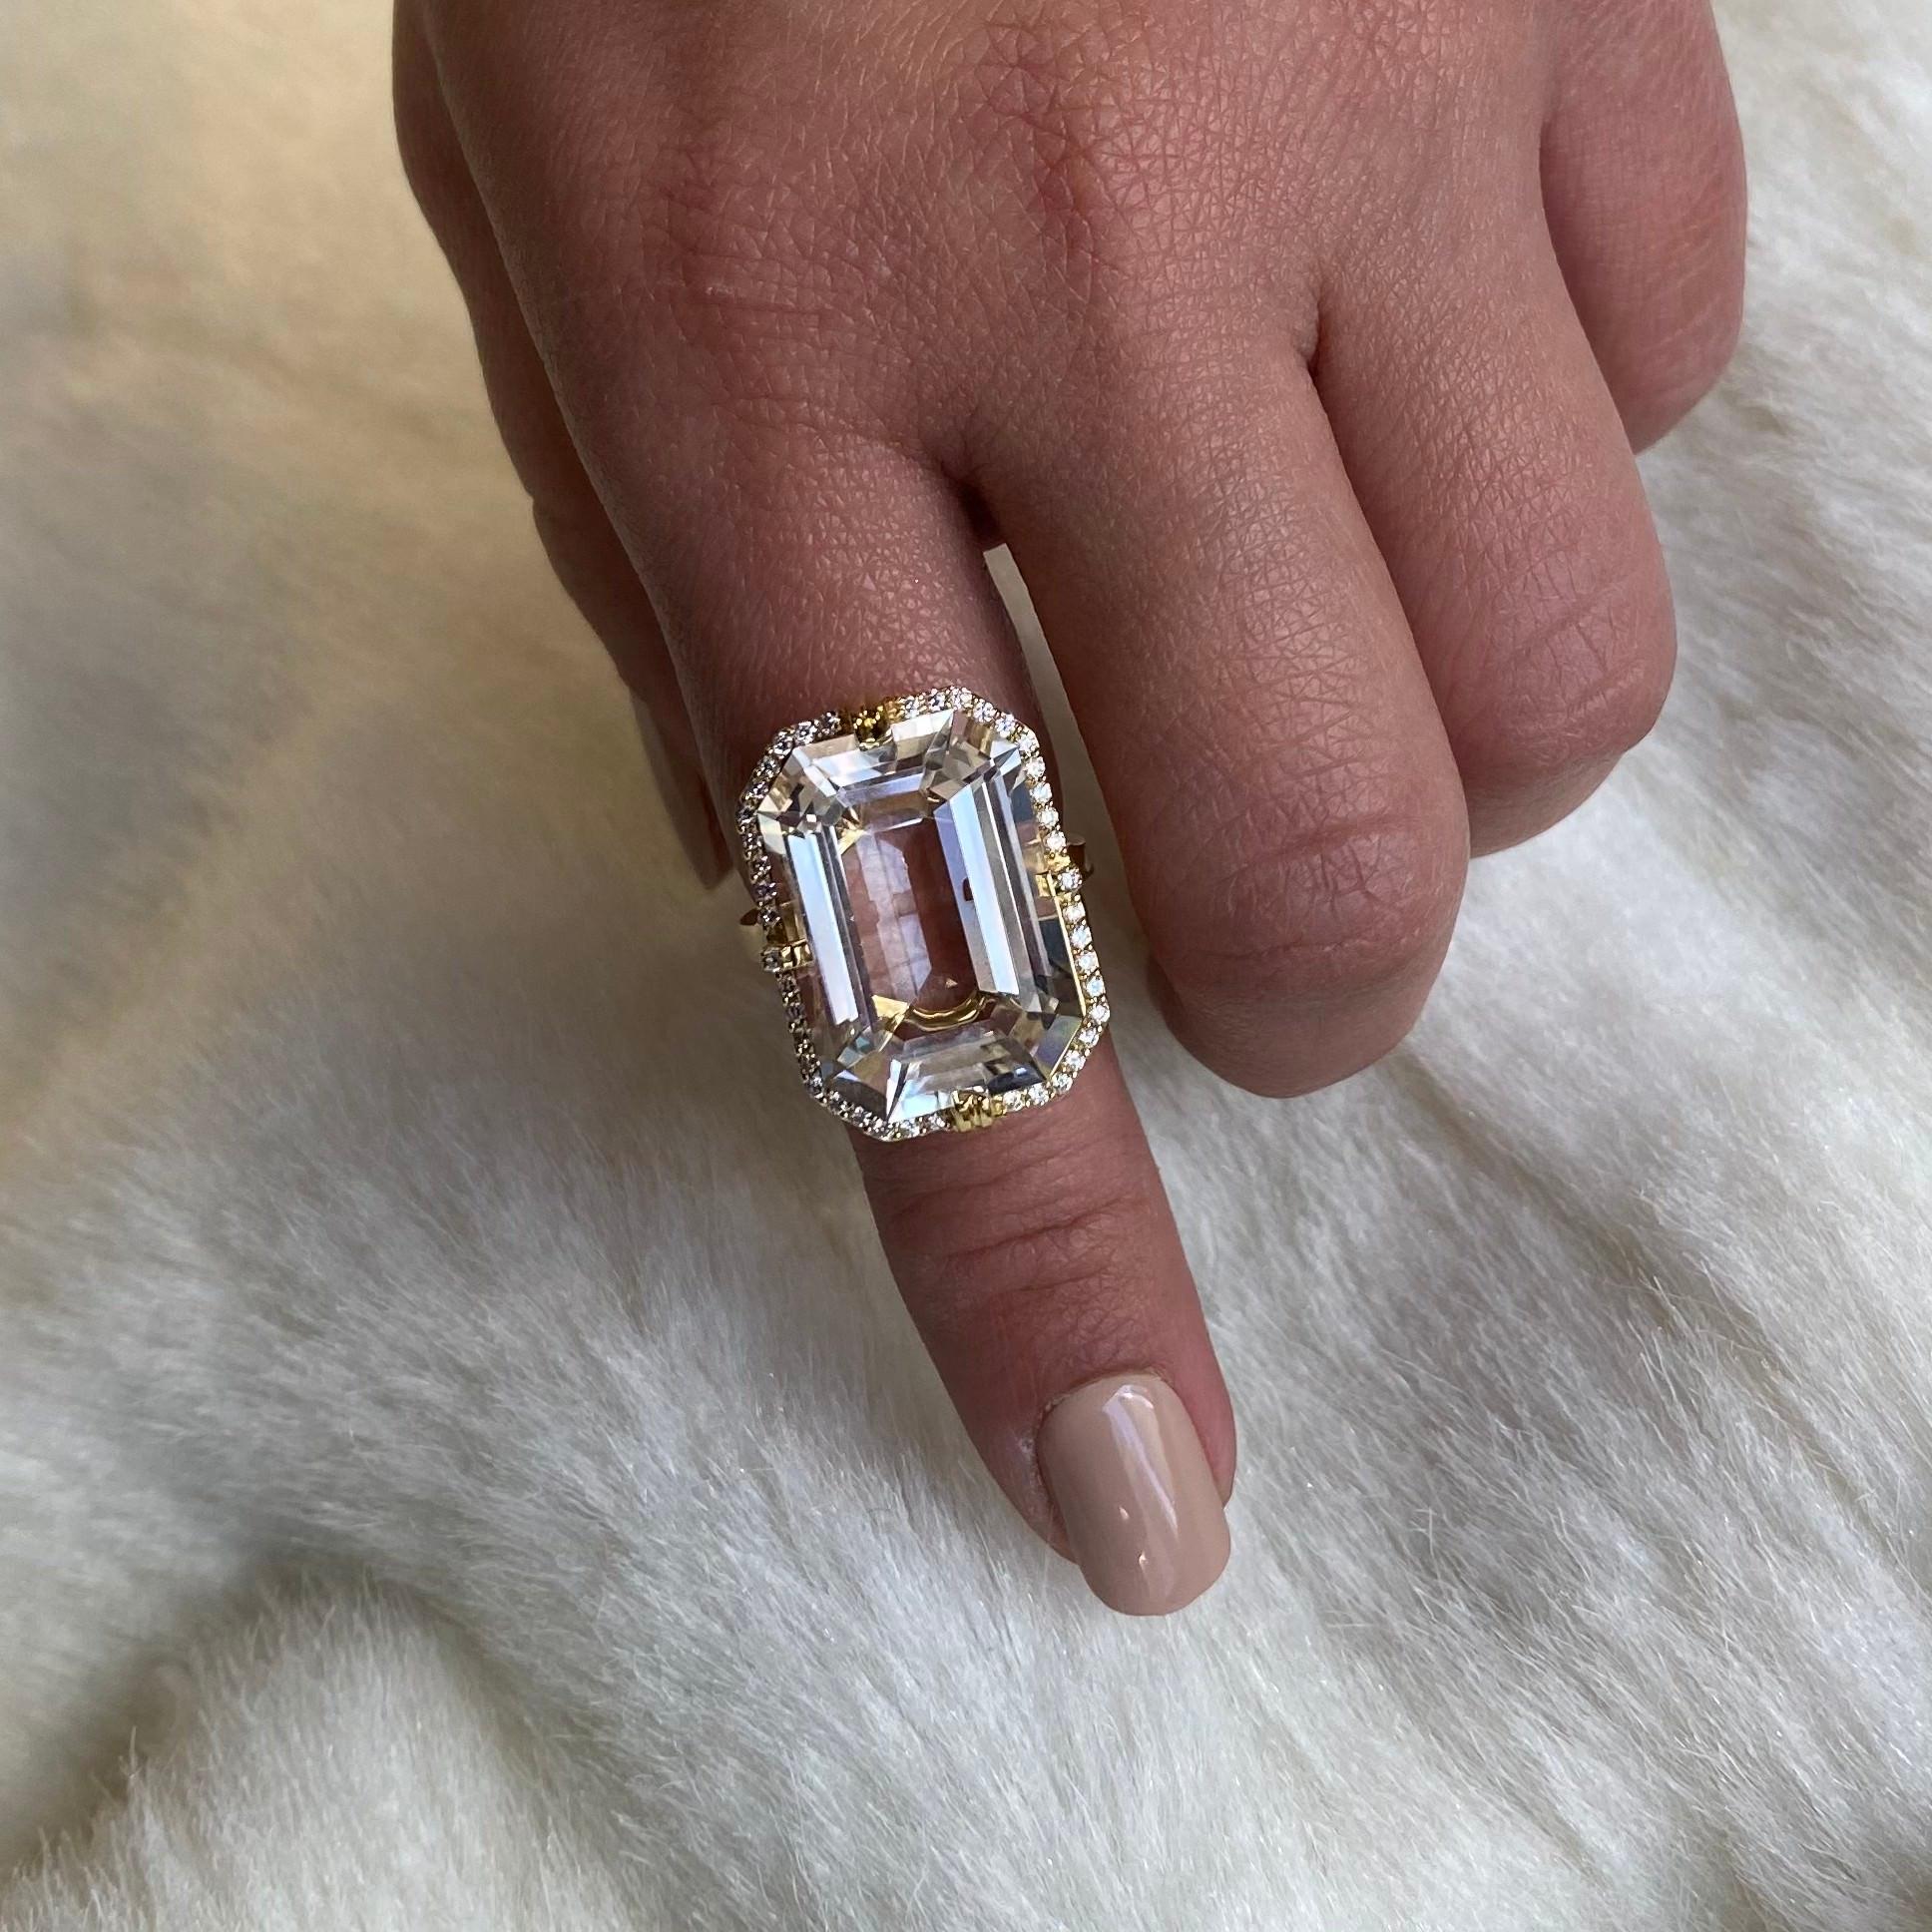 Rock Crystal Emerald Cut Ring in 18K White Gold with Diamonds, from 'Gossip' Collection 

Stone Size: 10 x 15 mm

Diamonds: G-H / VS, Approx Wt: 0.25 Carats
